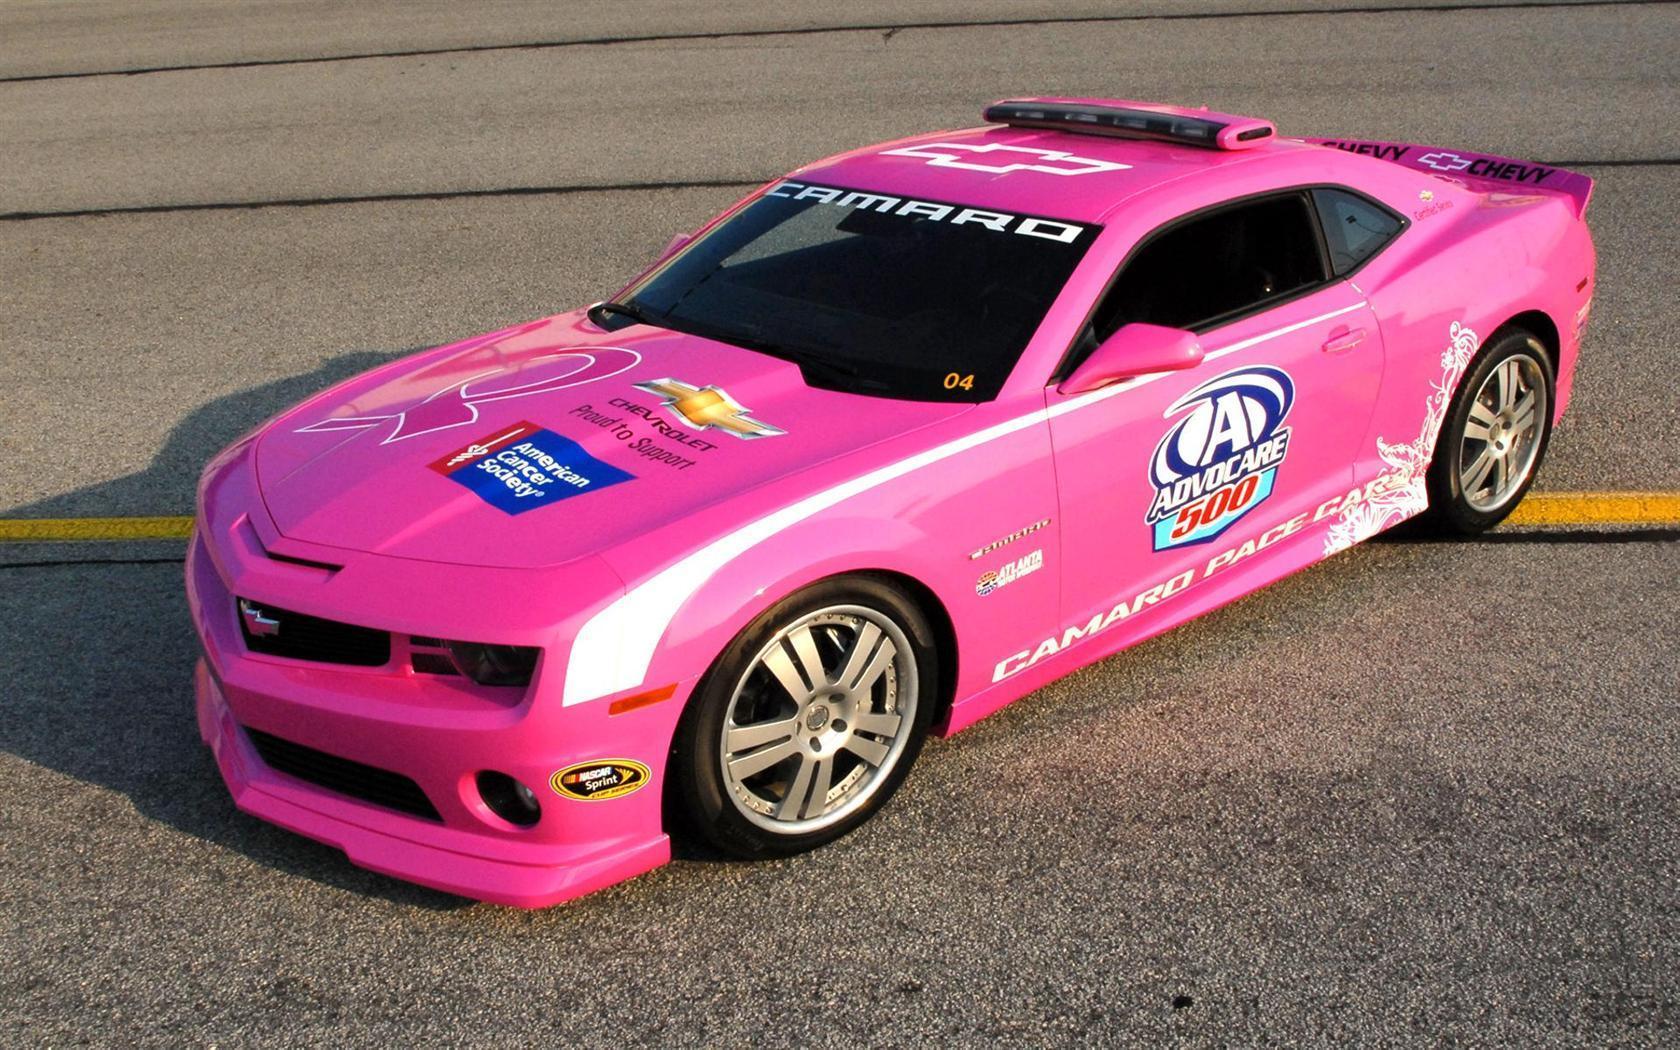 Chevrolet Pink Camaro Pace Car Image. Photo: 2012 Chevy